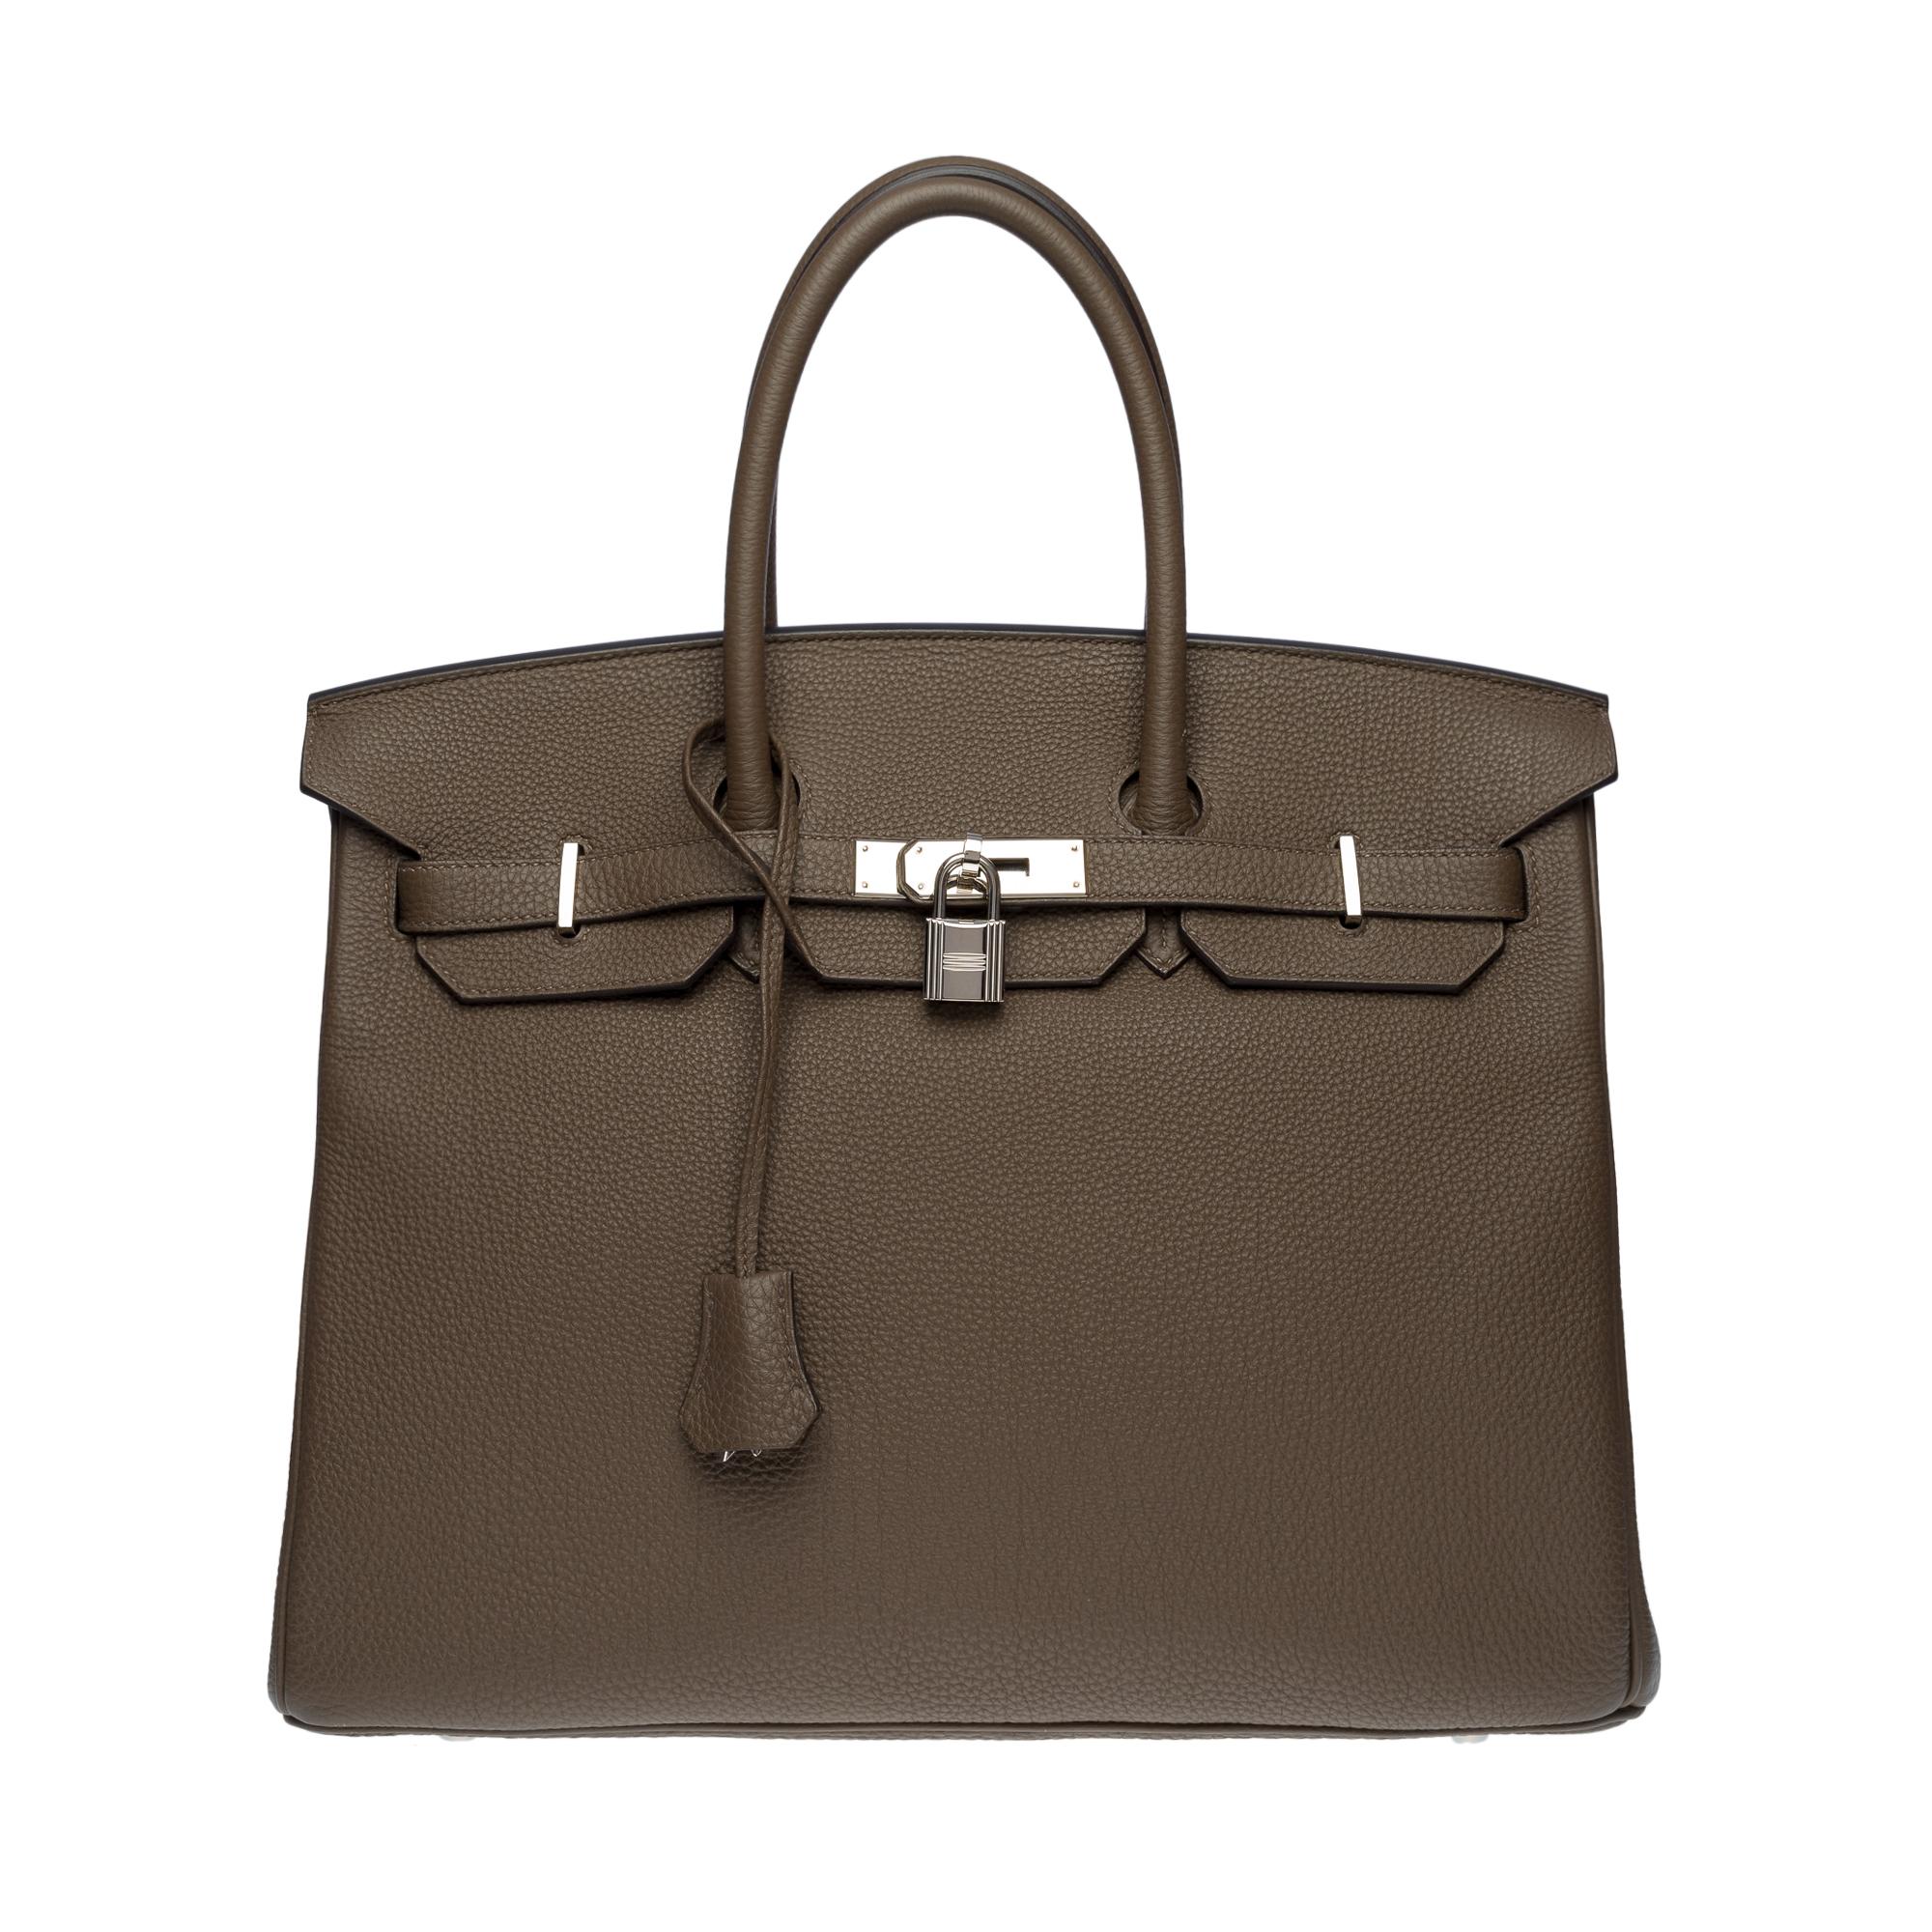 Exquisite & Rare Hermes Birkin 35 handbag in Gris Elephant Togo leather , Palladium Silver Metal hardware, double handle in grey leather for hand carrying

Flap closure
Inner lining in grey leather, one zippered pocket, one patch pocket
Signature: